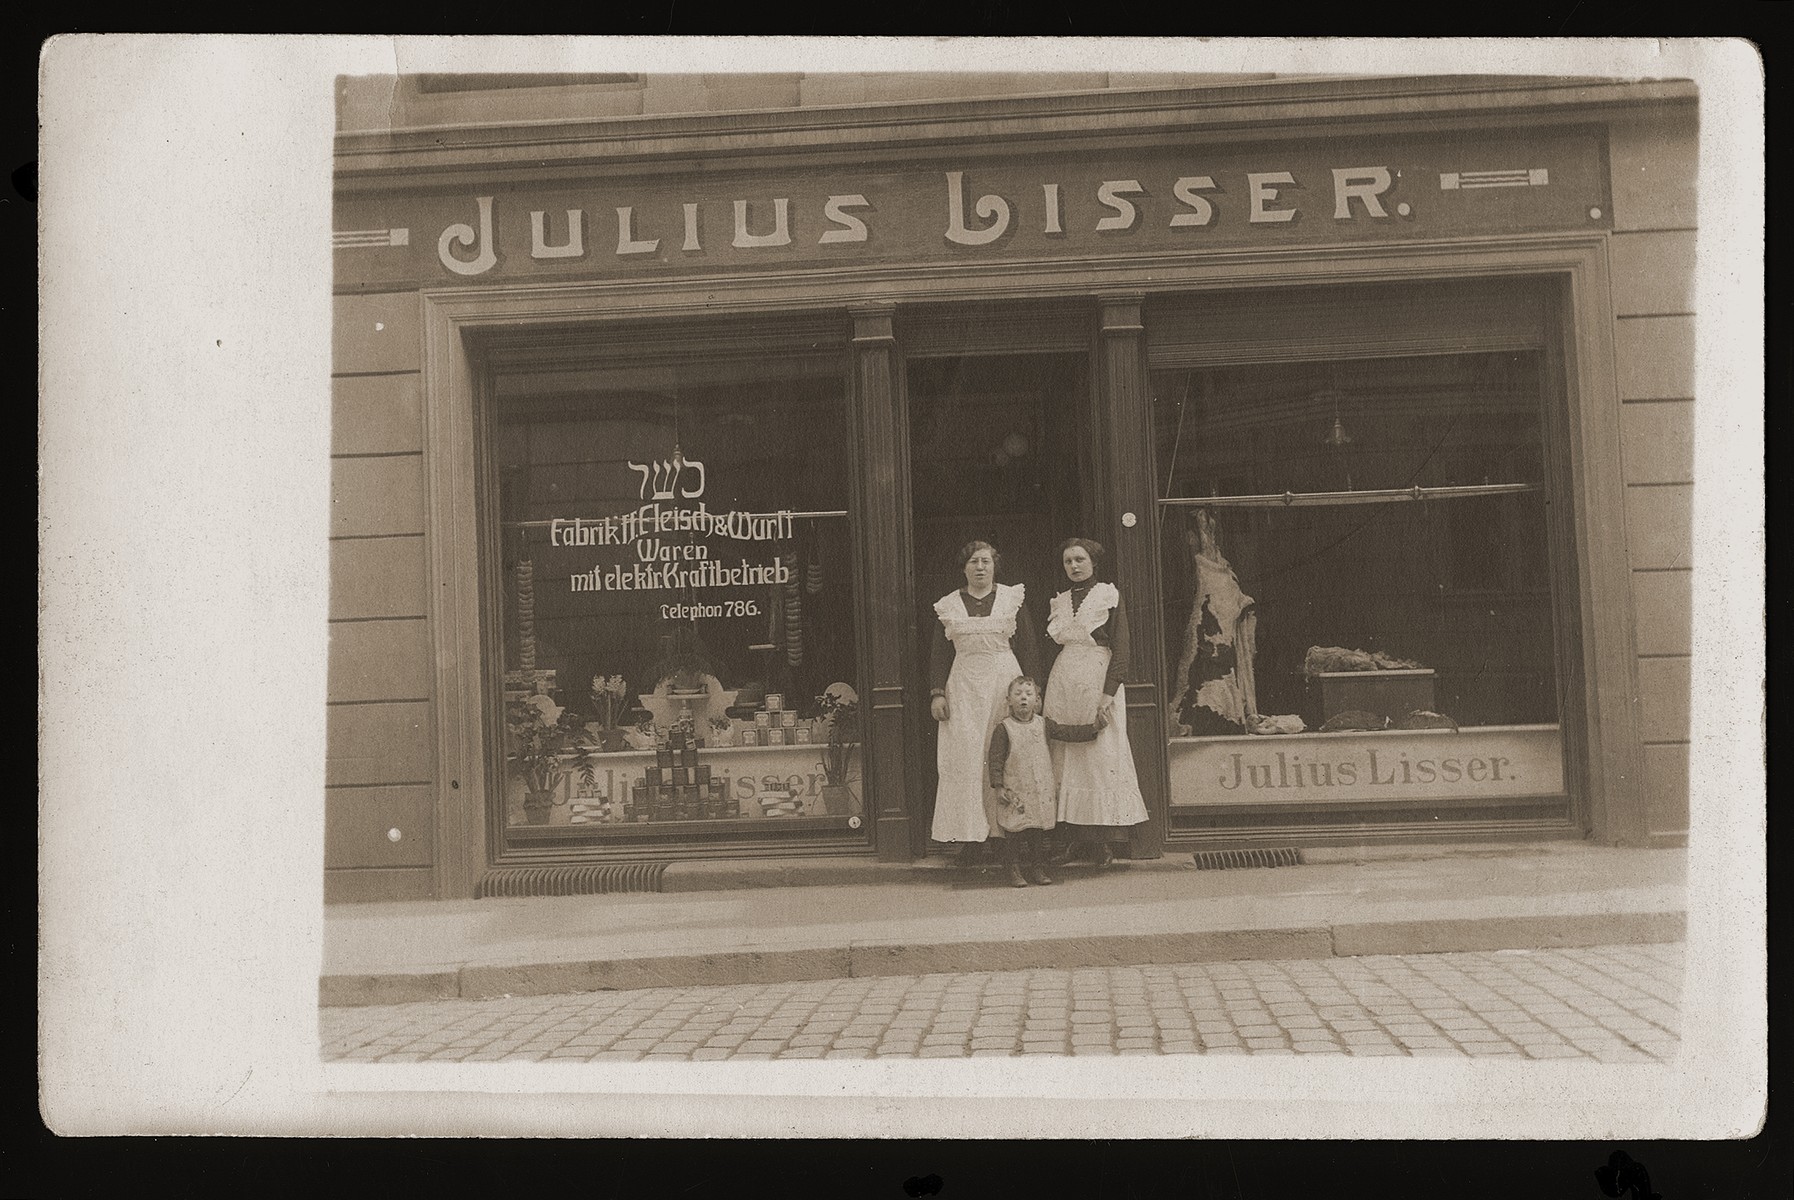 Members of the Lisser family pose in front of the Julius Lisser kosher butcher shop in Danzig.